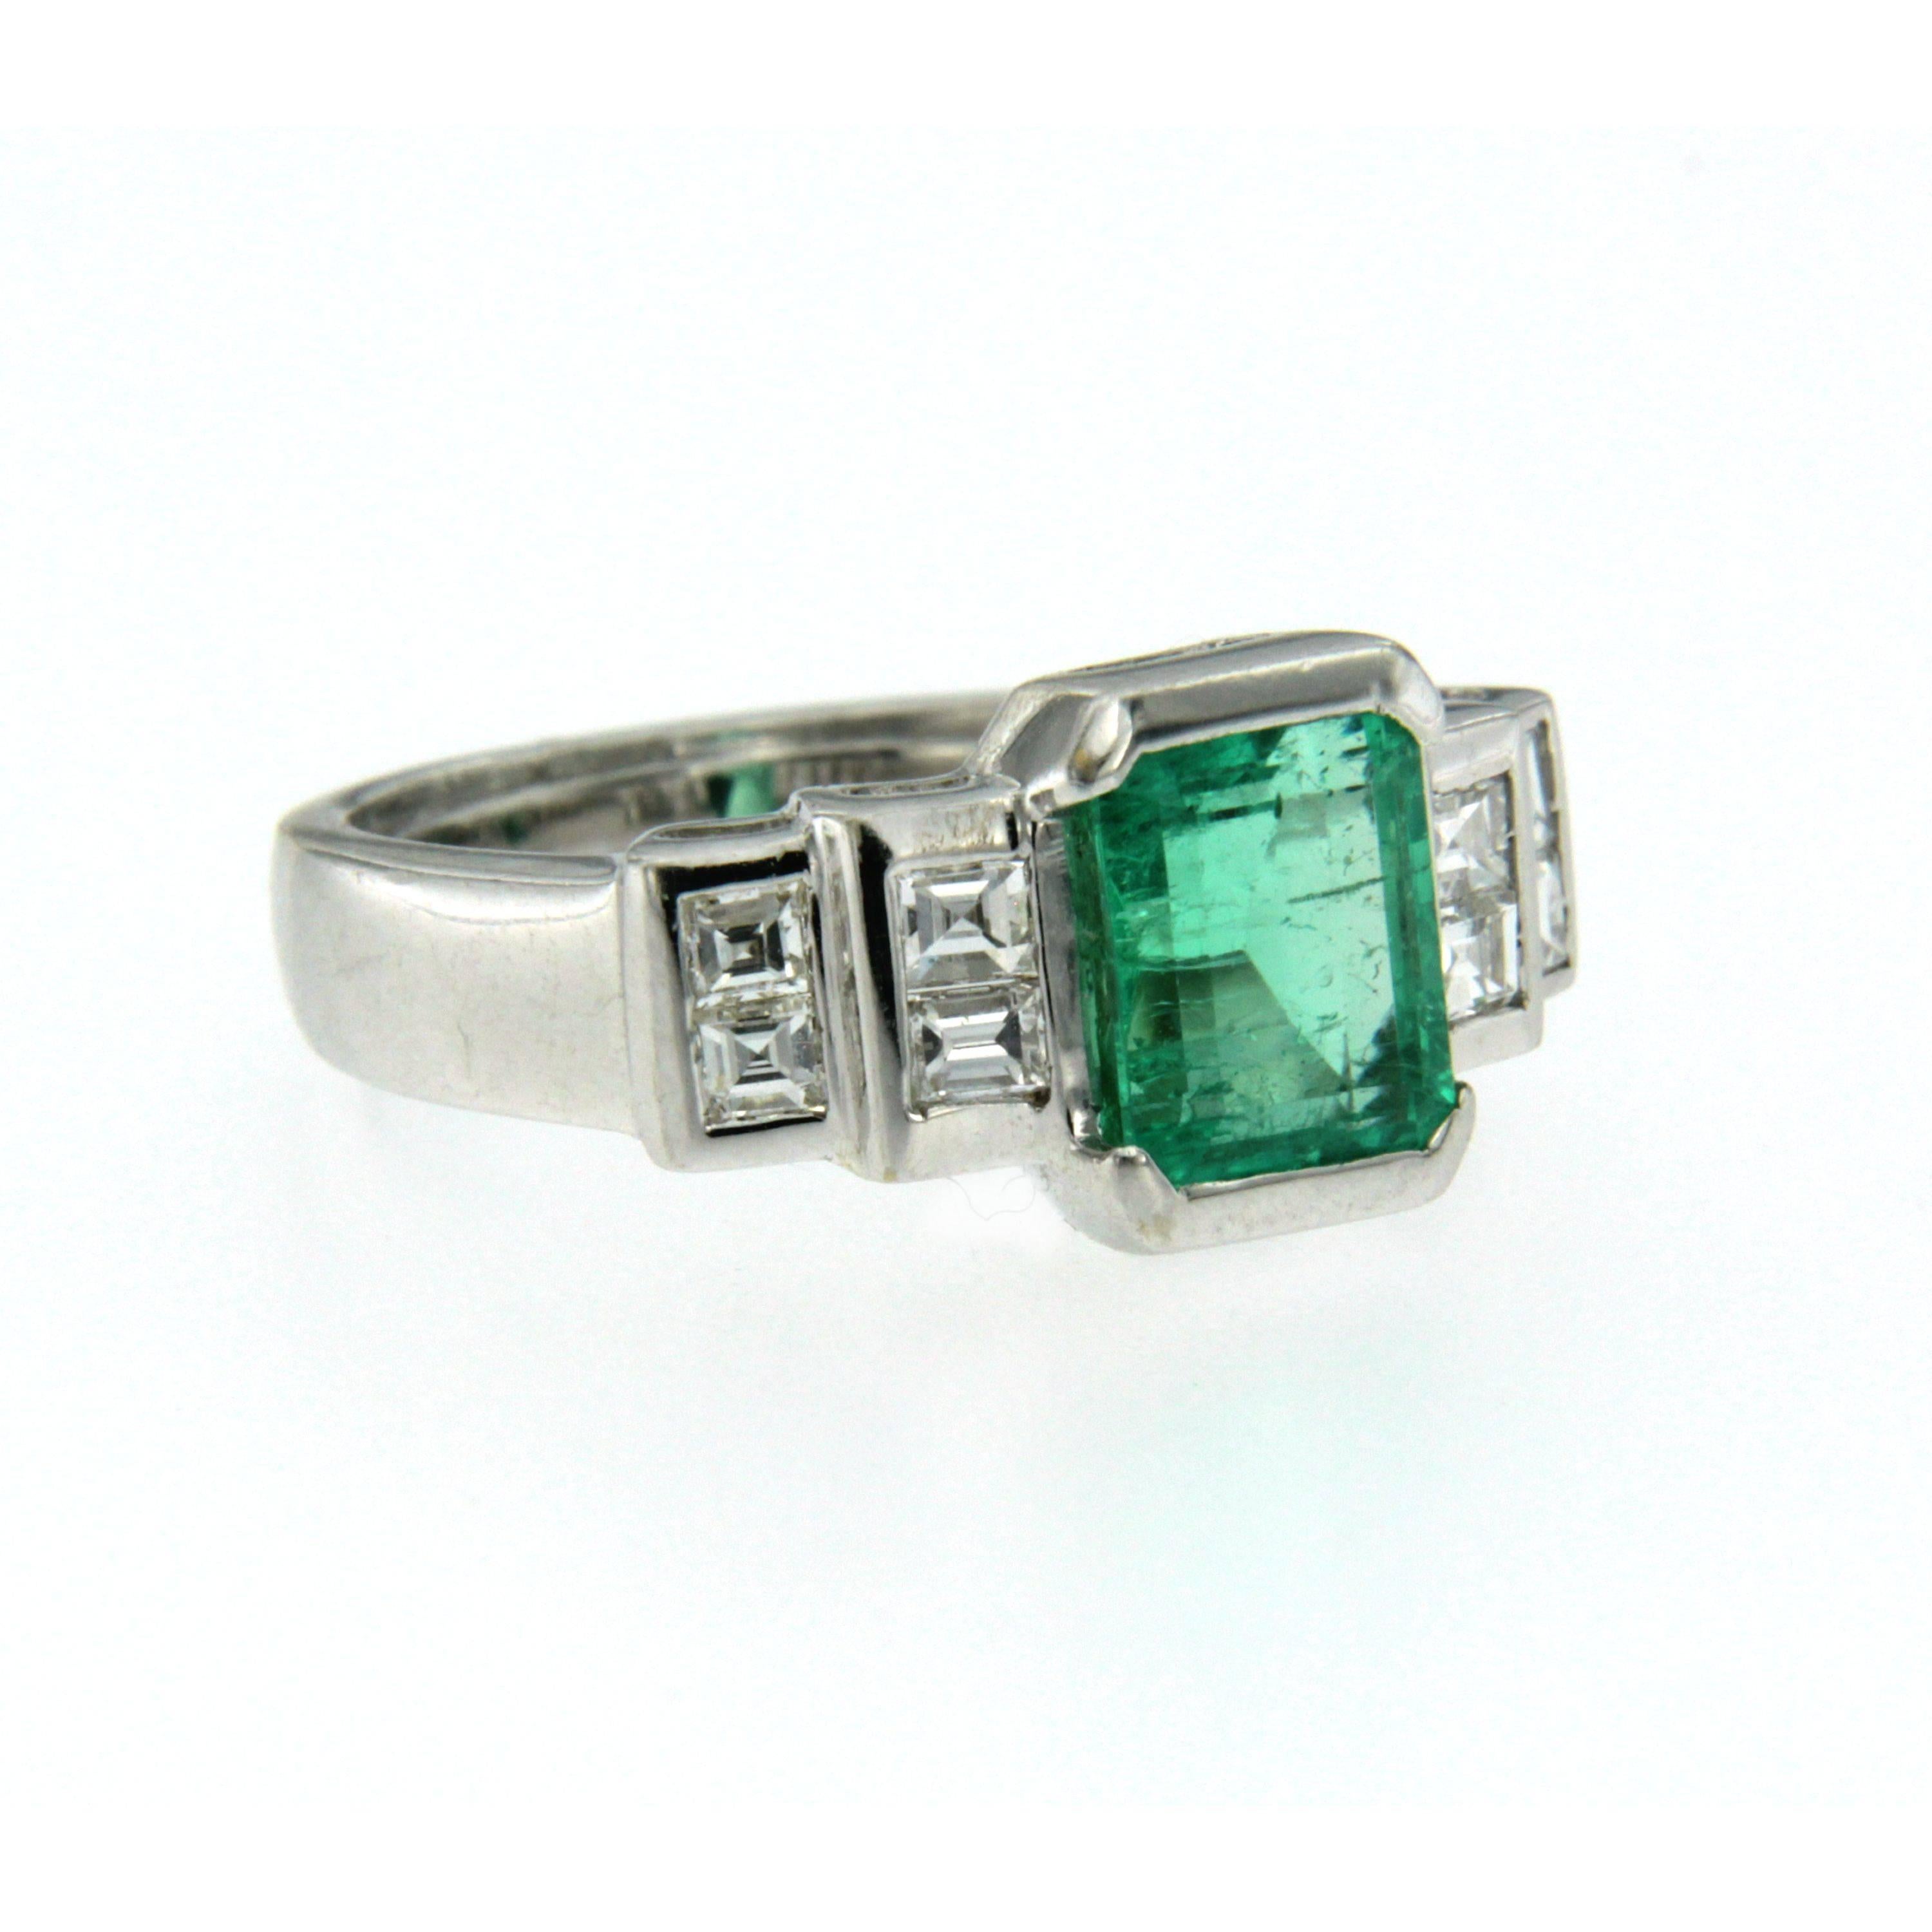 A fine and impressive 18k white Gold ring featuring a 2.20 ct Emerald-cut natural Colombian Emeral graded minor oil, free of resin tratment. Flanked on each side are baguette cut diamonds totaling 0.80 carats G color VVS clarity. Circa